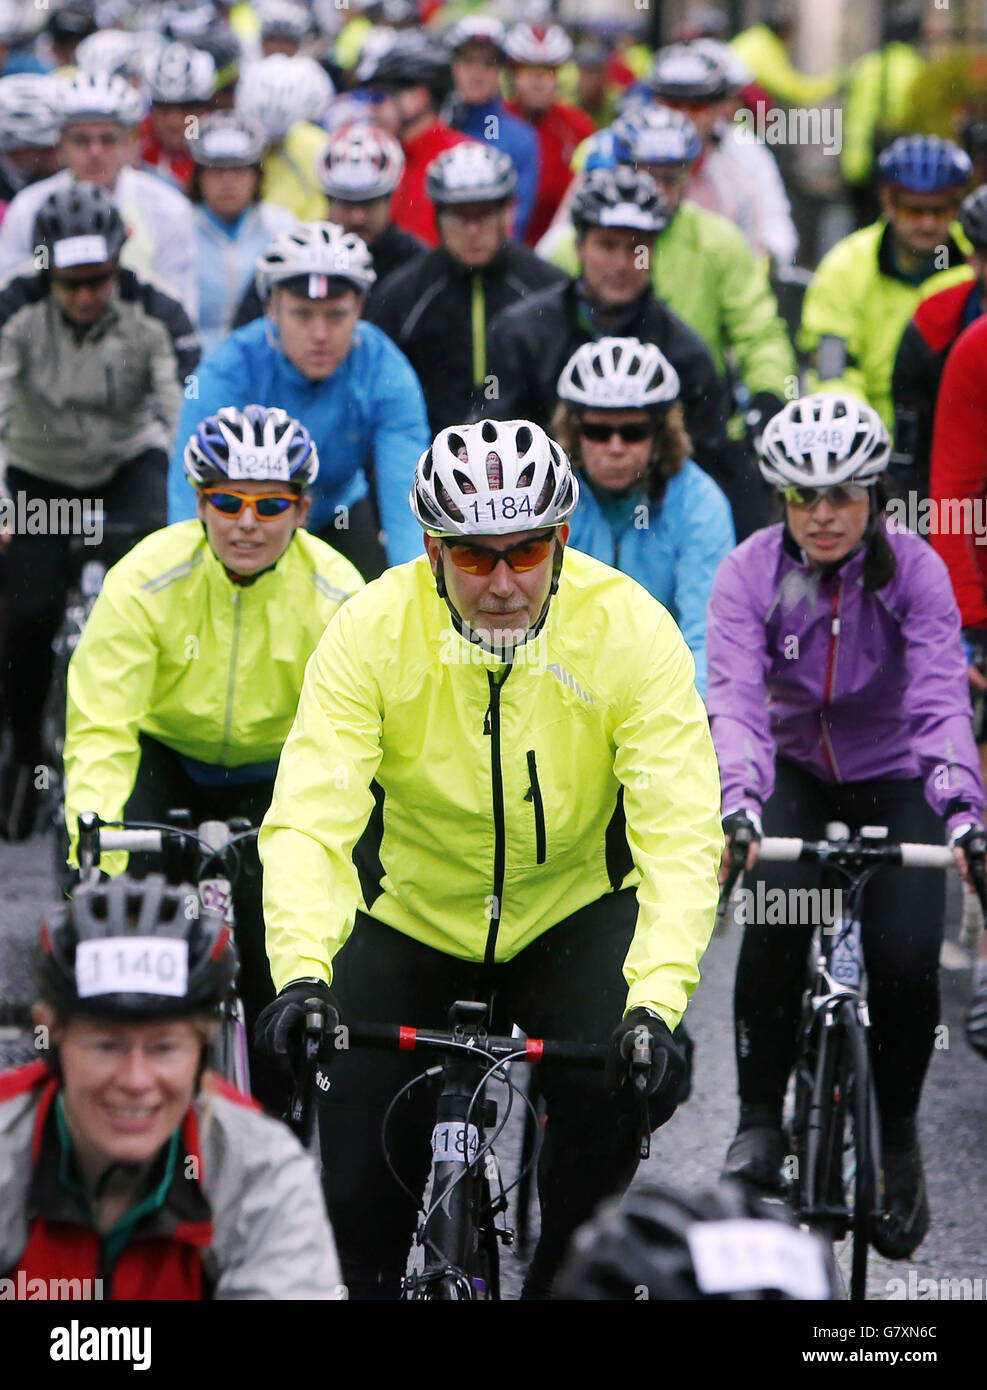 Marie Curie Cancer Care Etape Caledonia. Cyclists take part in the Marie Curie Cancer Care Etape Caledonia cycle race in Pitlochry, Scotland. Stock Photo